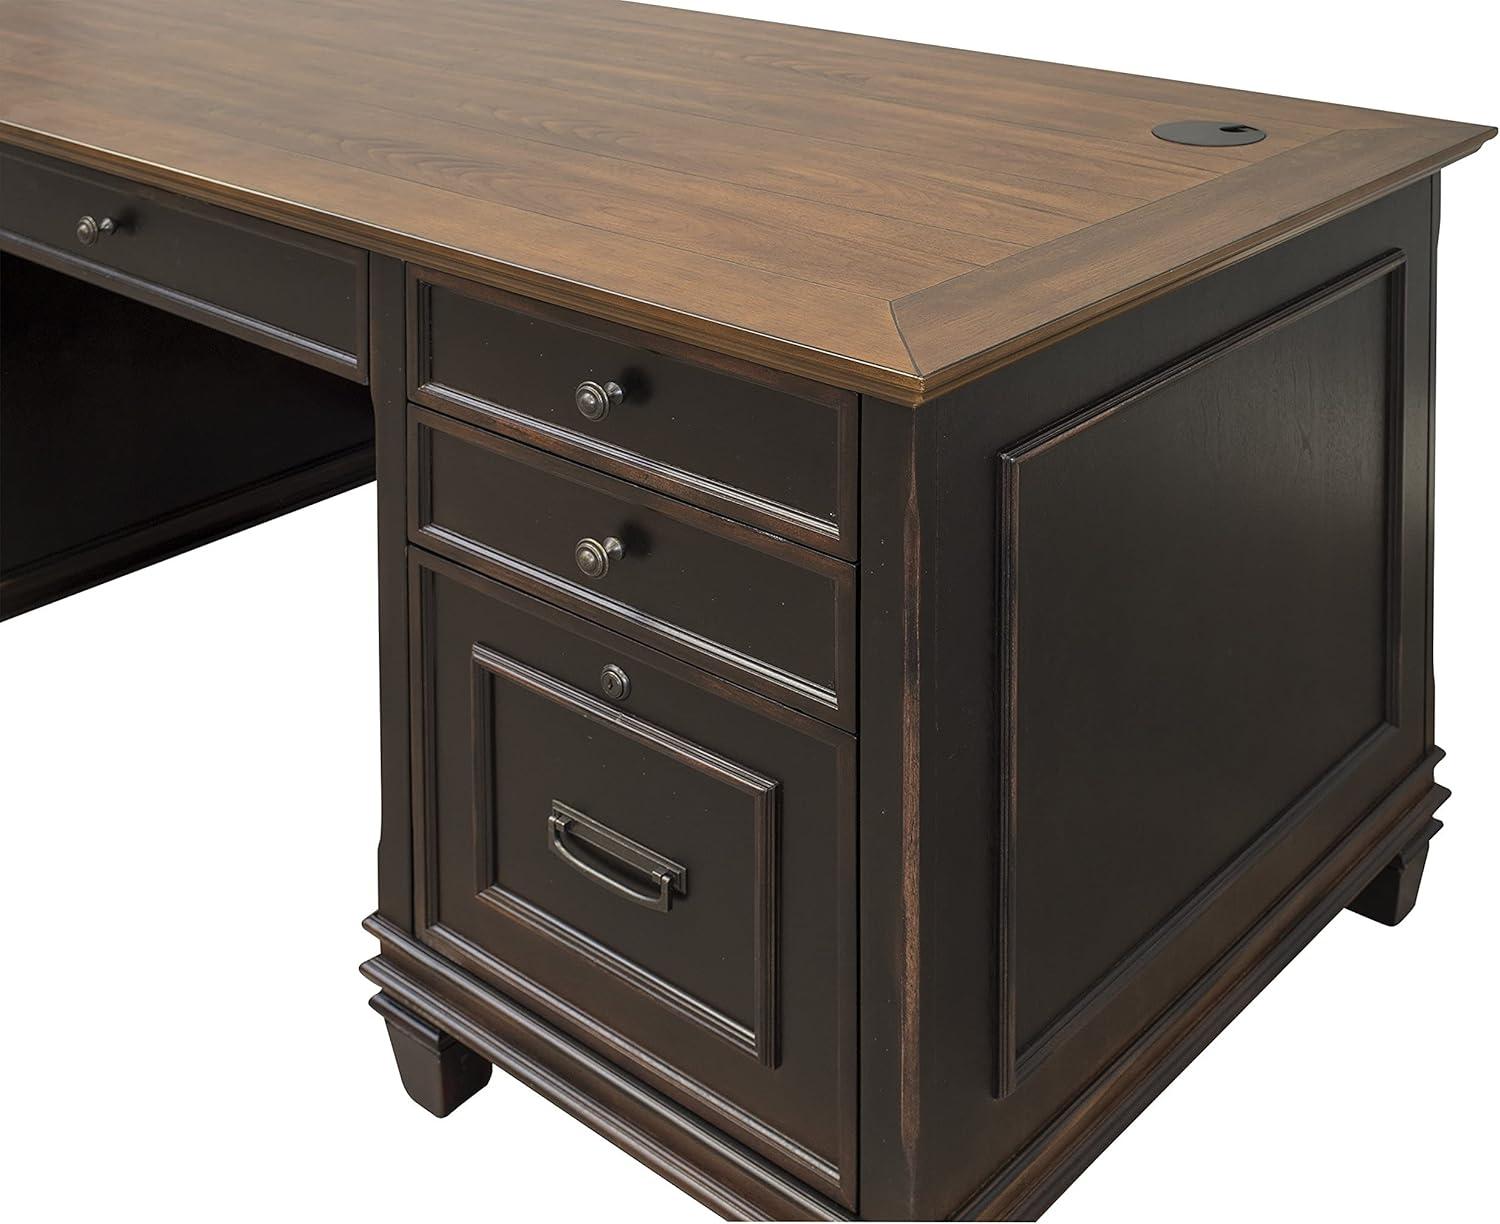 Hartford Executive Home Office Desk with Hutch, Black and Brown